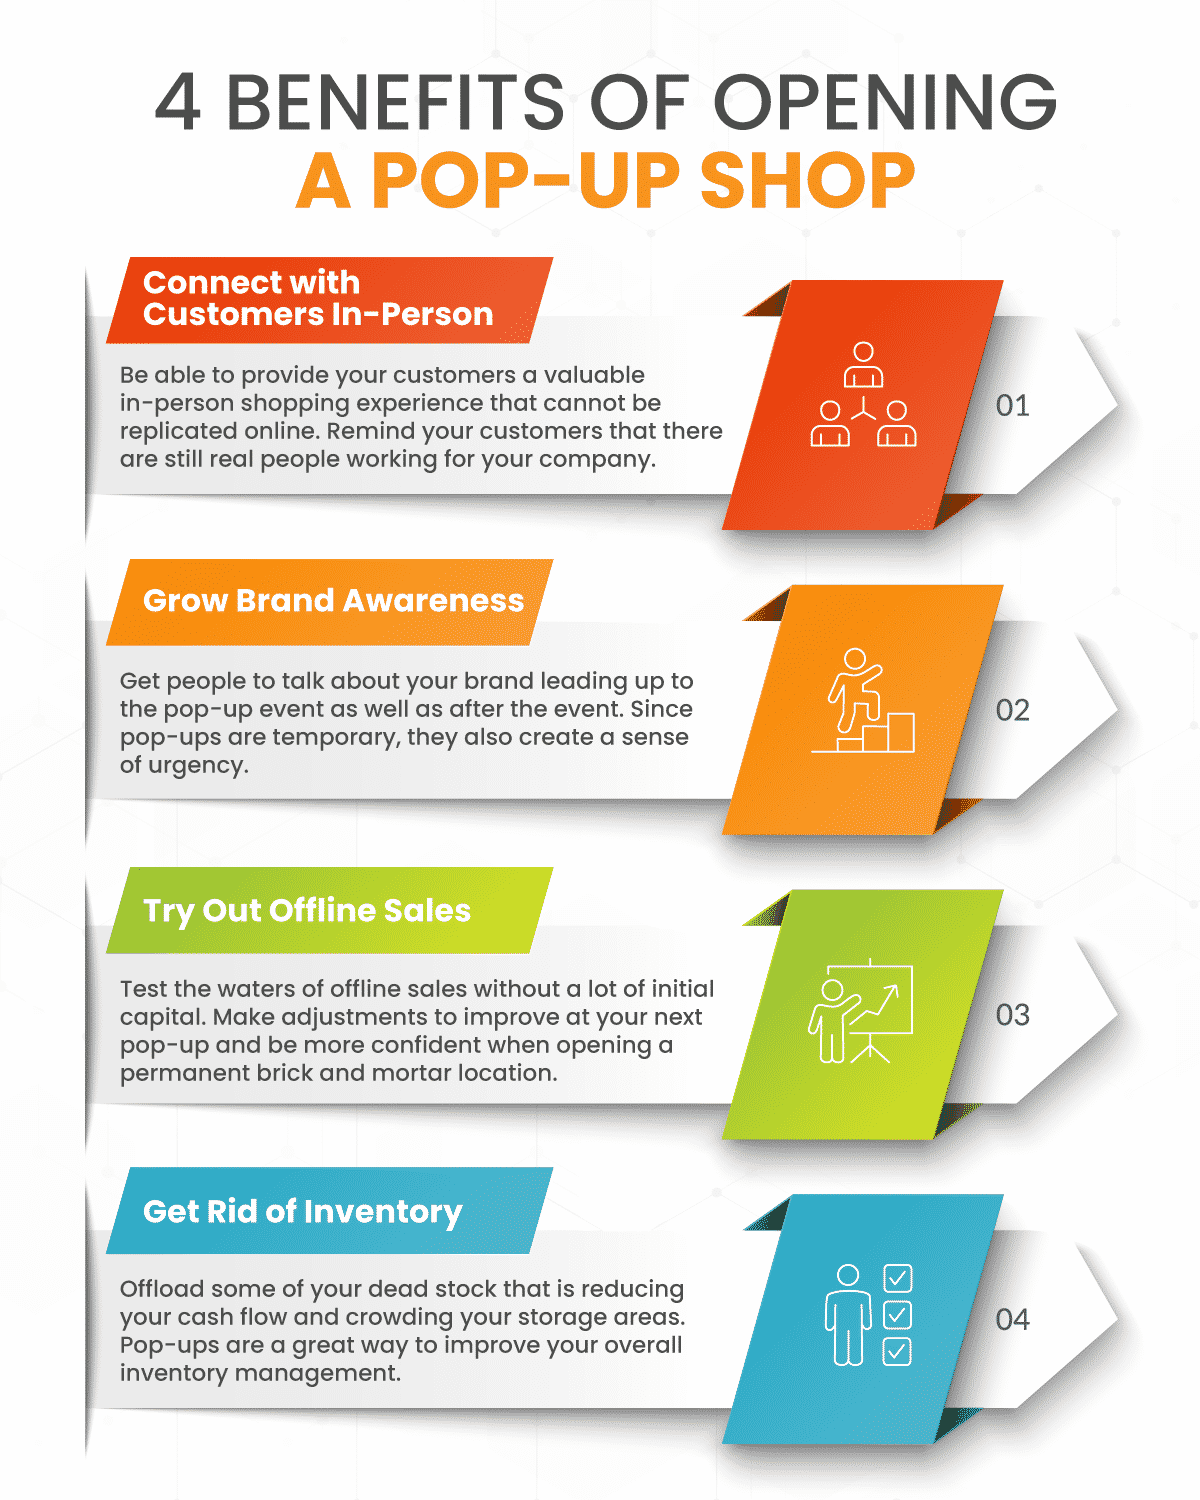 4 benefits of opening a pop-up shop infographic